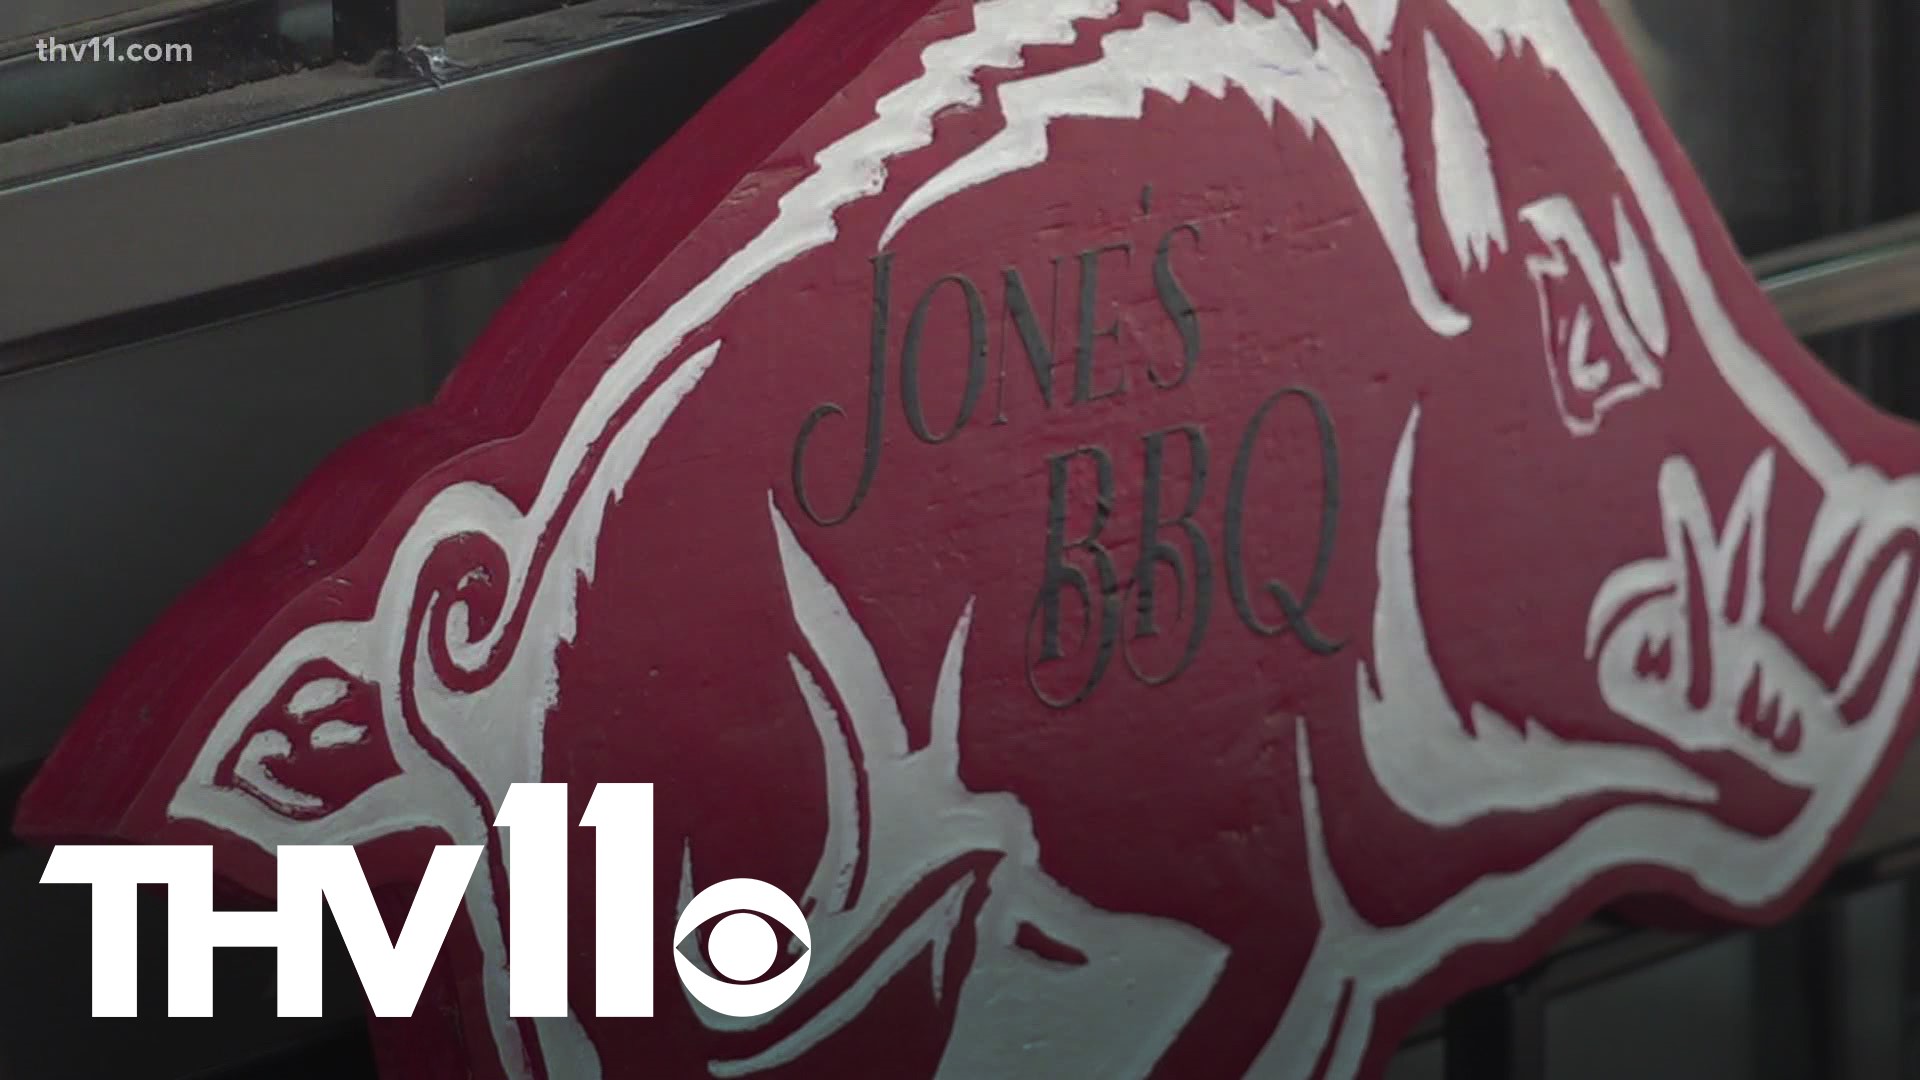 One of Arkansas' oldest Black-owned businesses reopened on Wednesday. Jones B-B-Q in Mariana has been open since 1910. A fire forced them to close back in February.